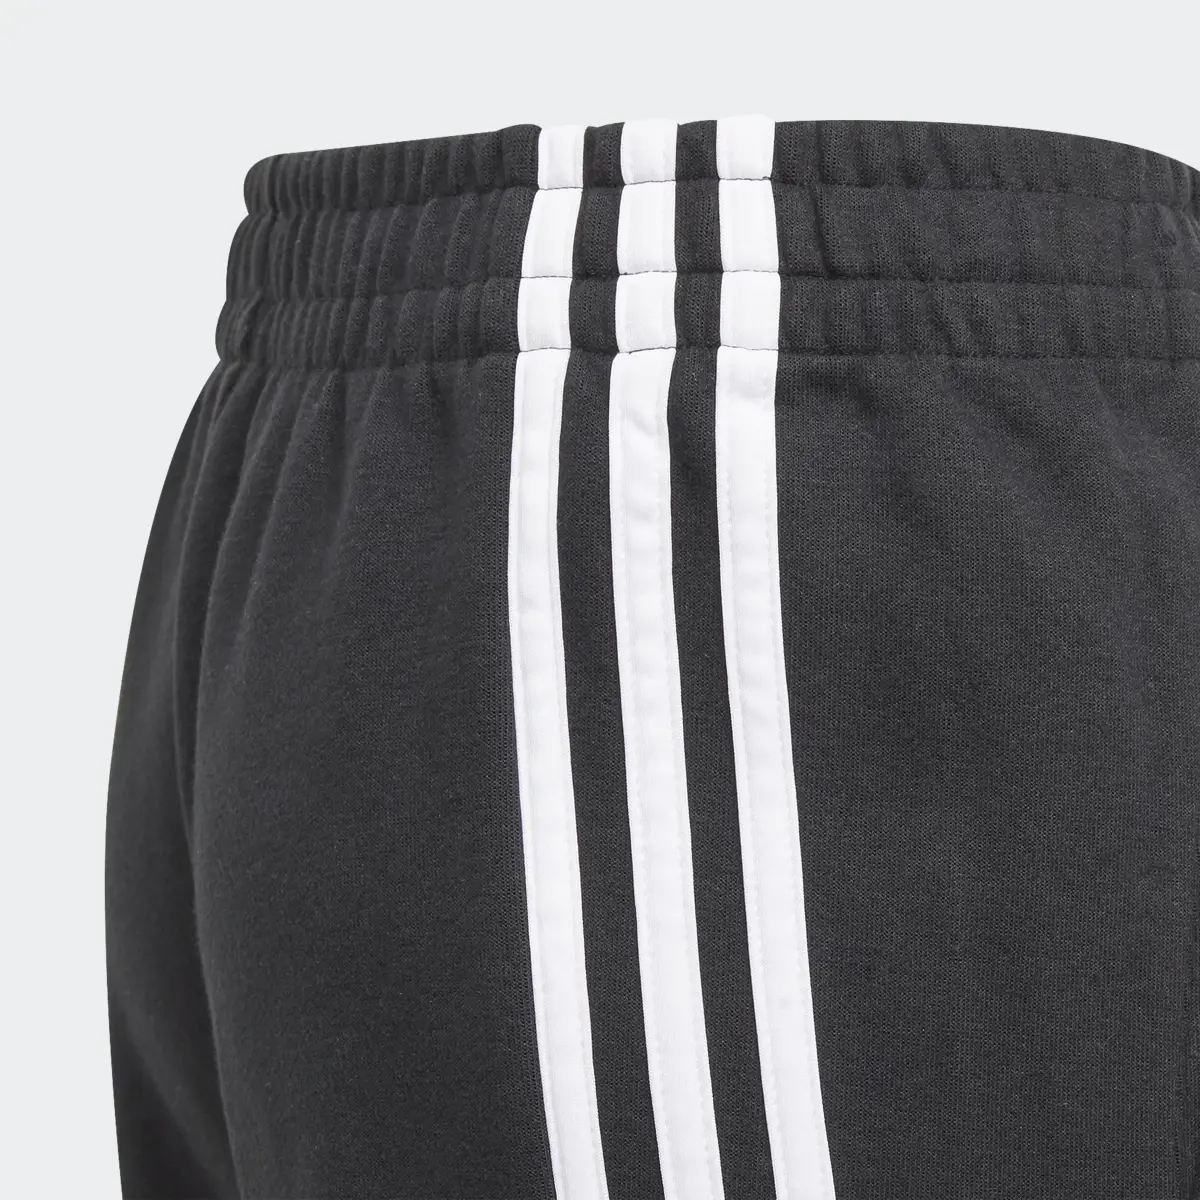 Adidas 3-Stripes Tapered Leg Tracksuit Bottoms. 3